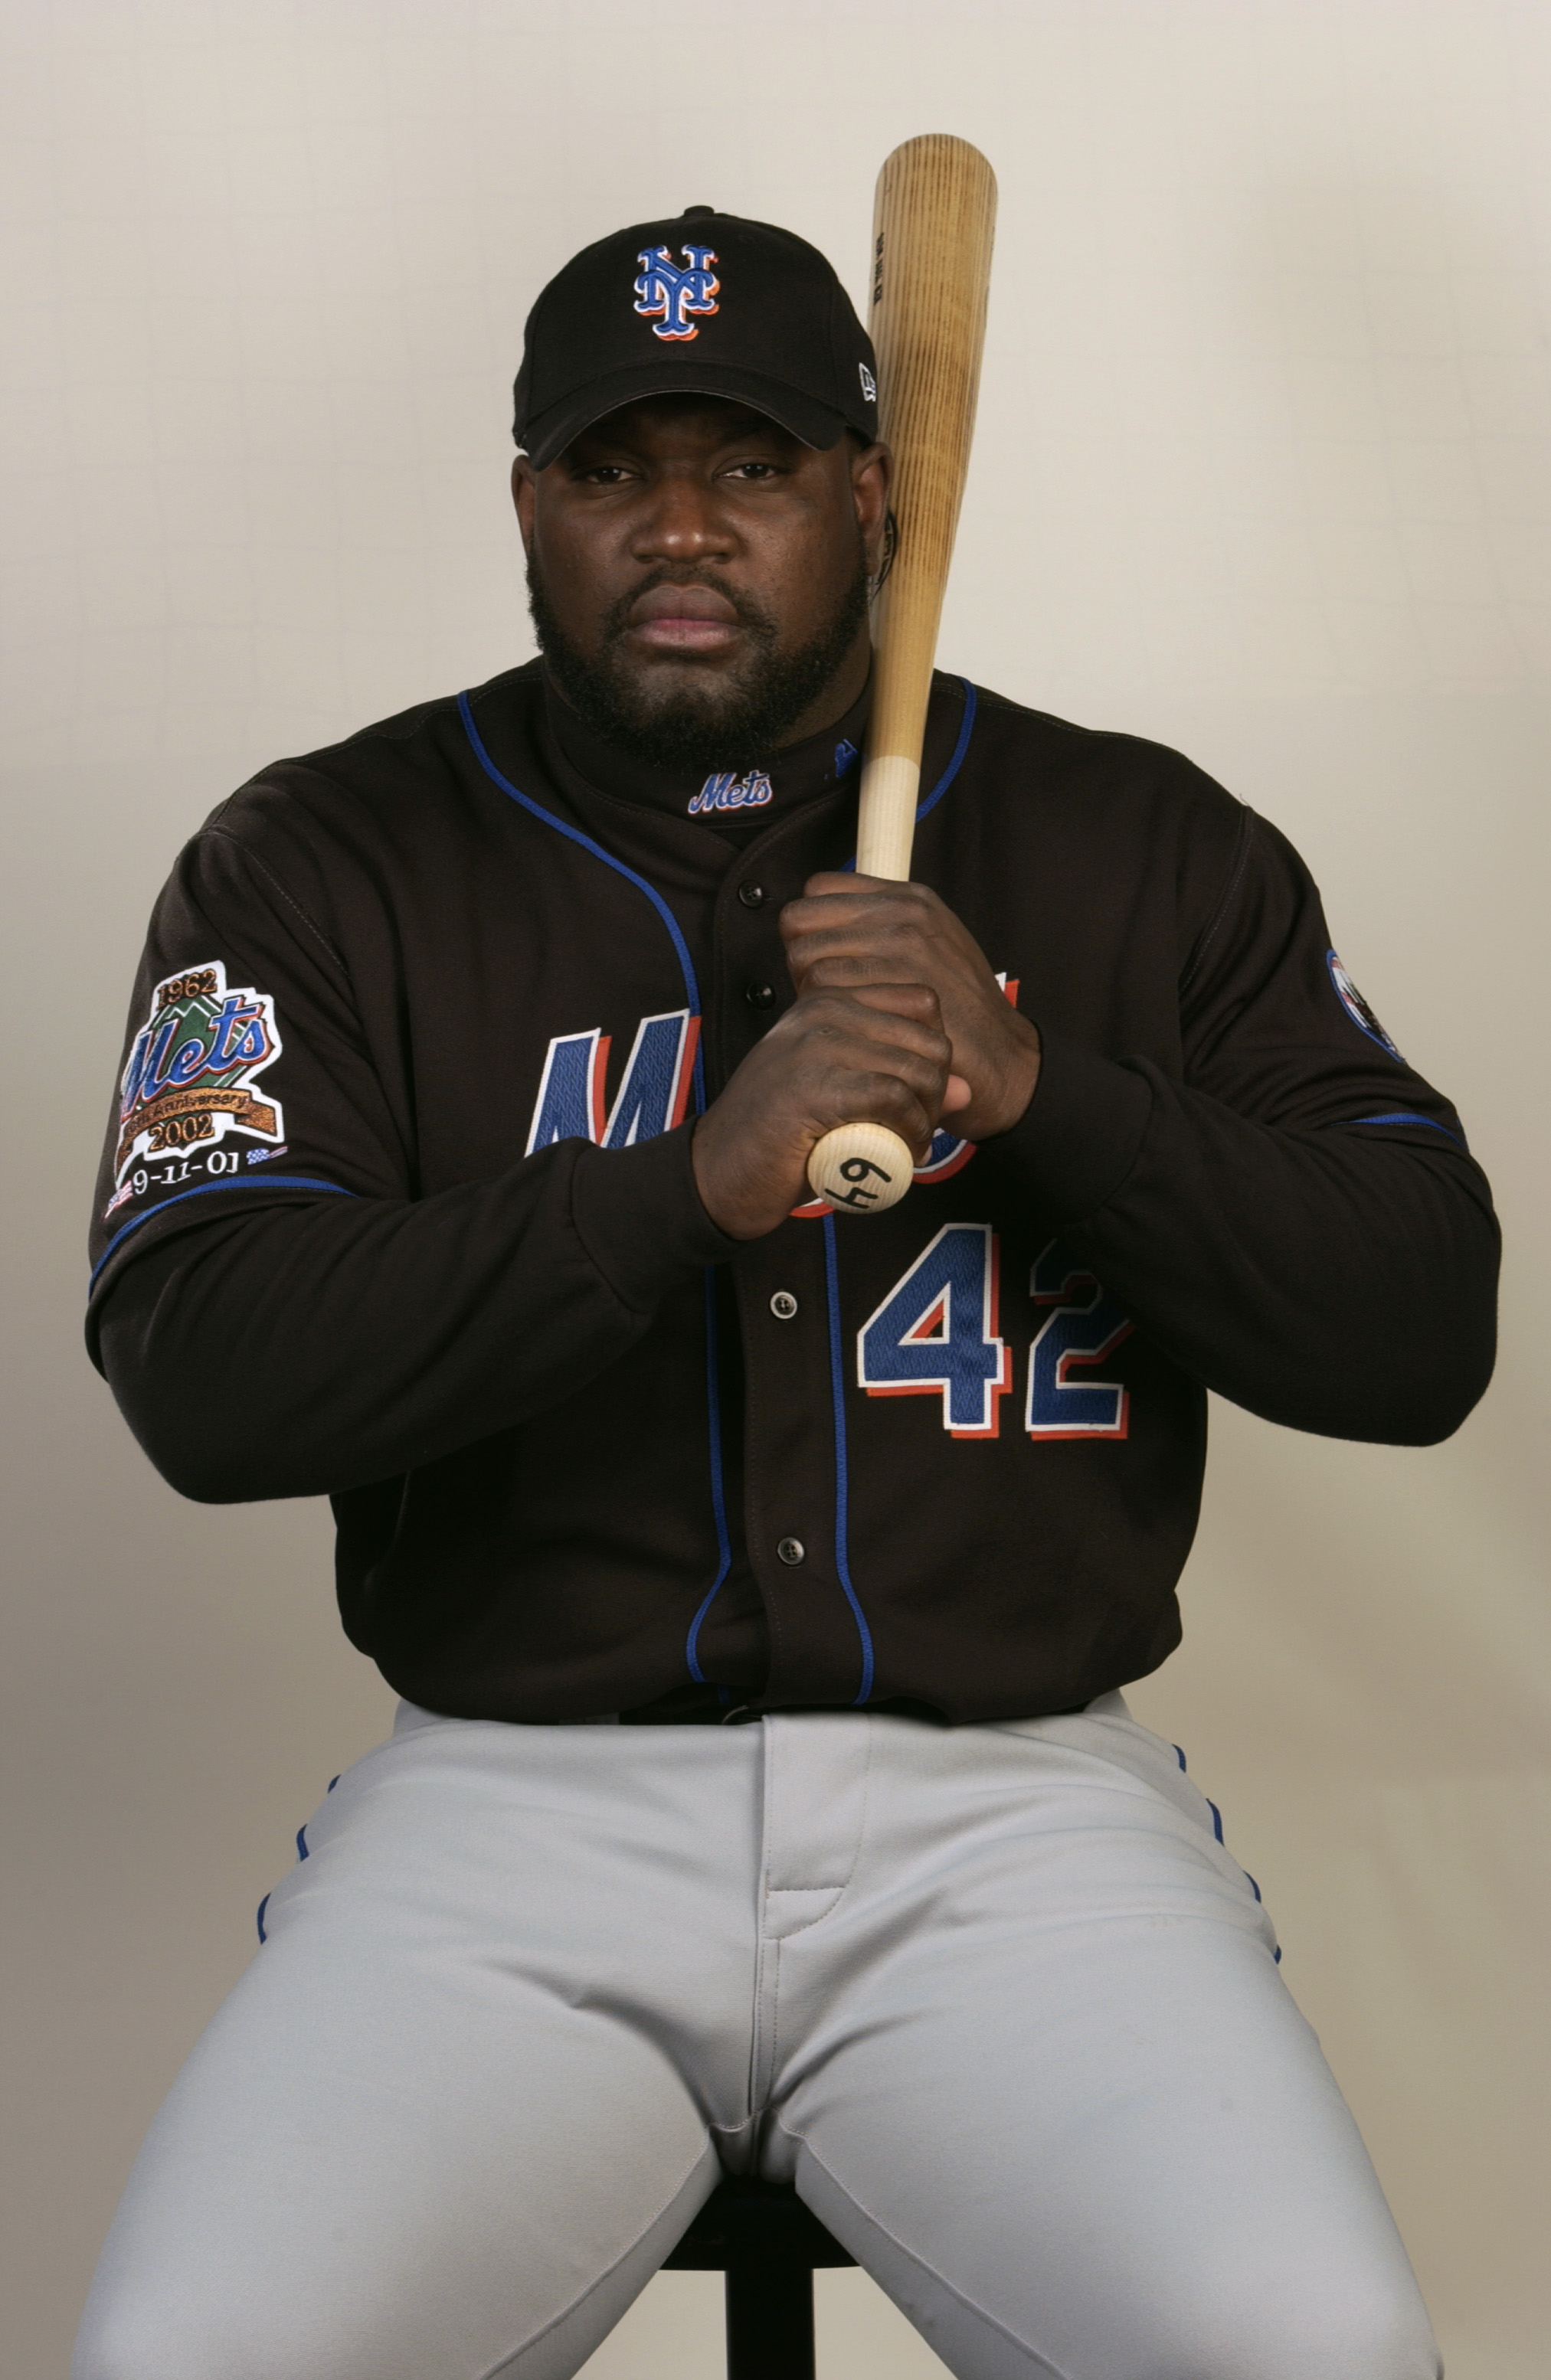 PORT ST. LUCIE, FL - FEBRUARY 25: Mo Vaughn of the New York Mets poses for a portrait during media day at Thomas J. White Stadium on February 25, 2003 in Port St. Lucie, Florida.  (Photo by Fernando Medina/Getty Images)